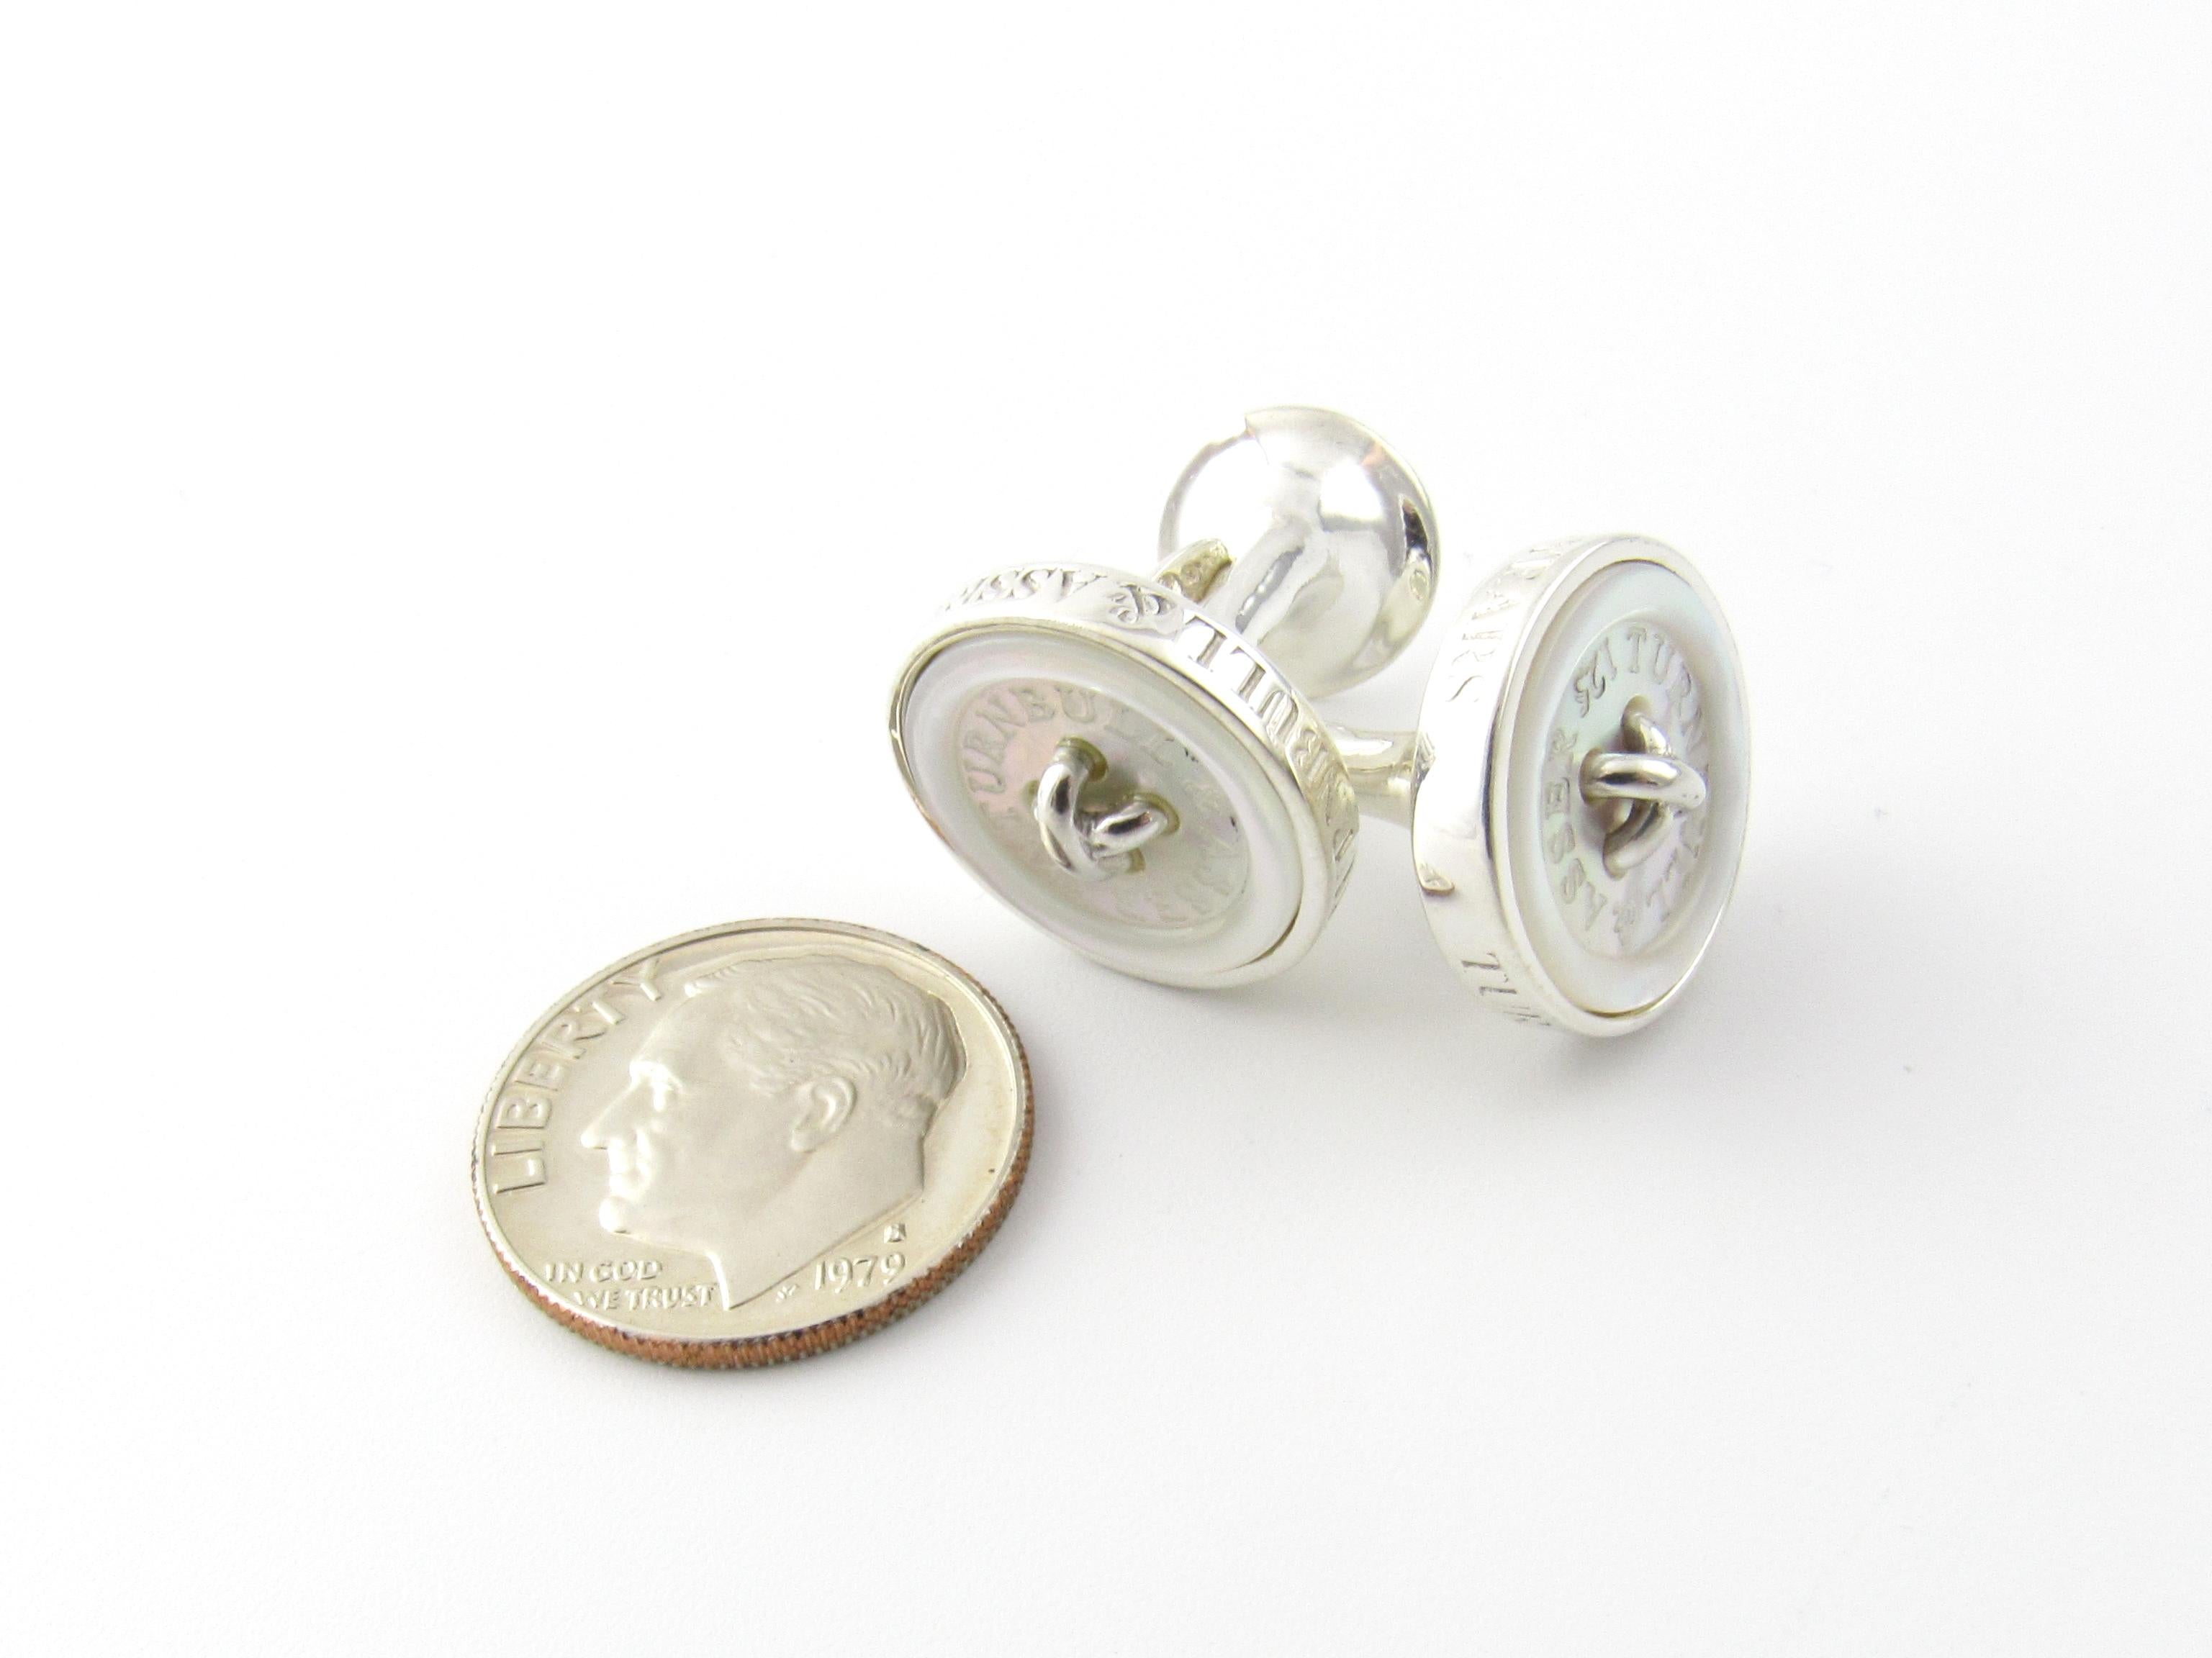 Turnbull & Asser Sterling Silver and Mother of Pearl Button Cufflinks 1